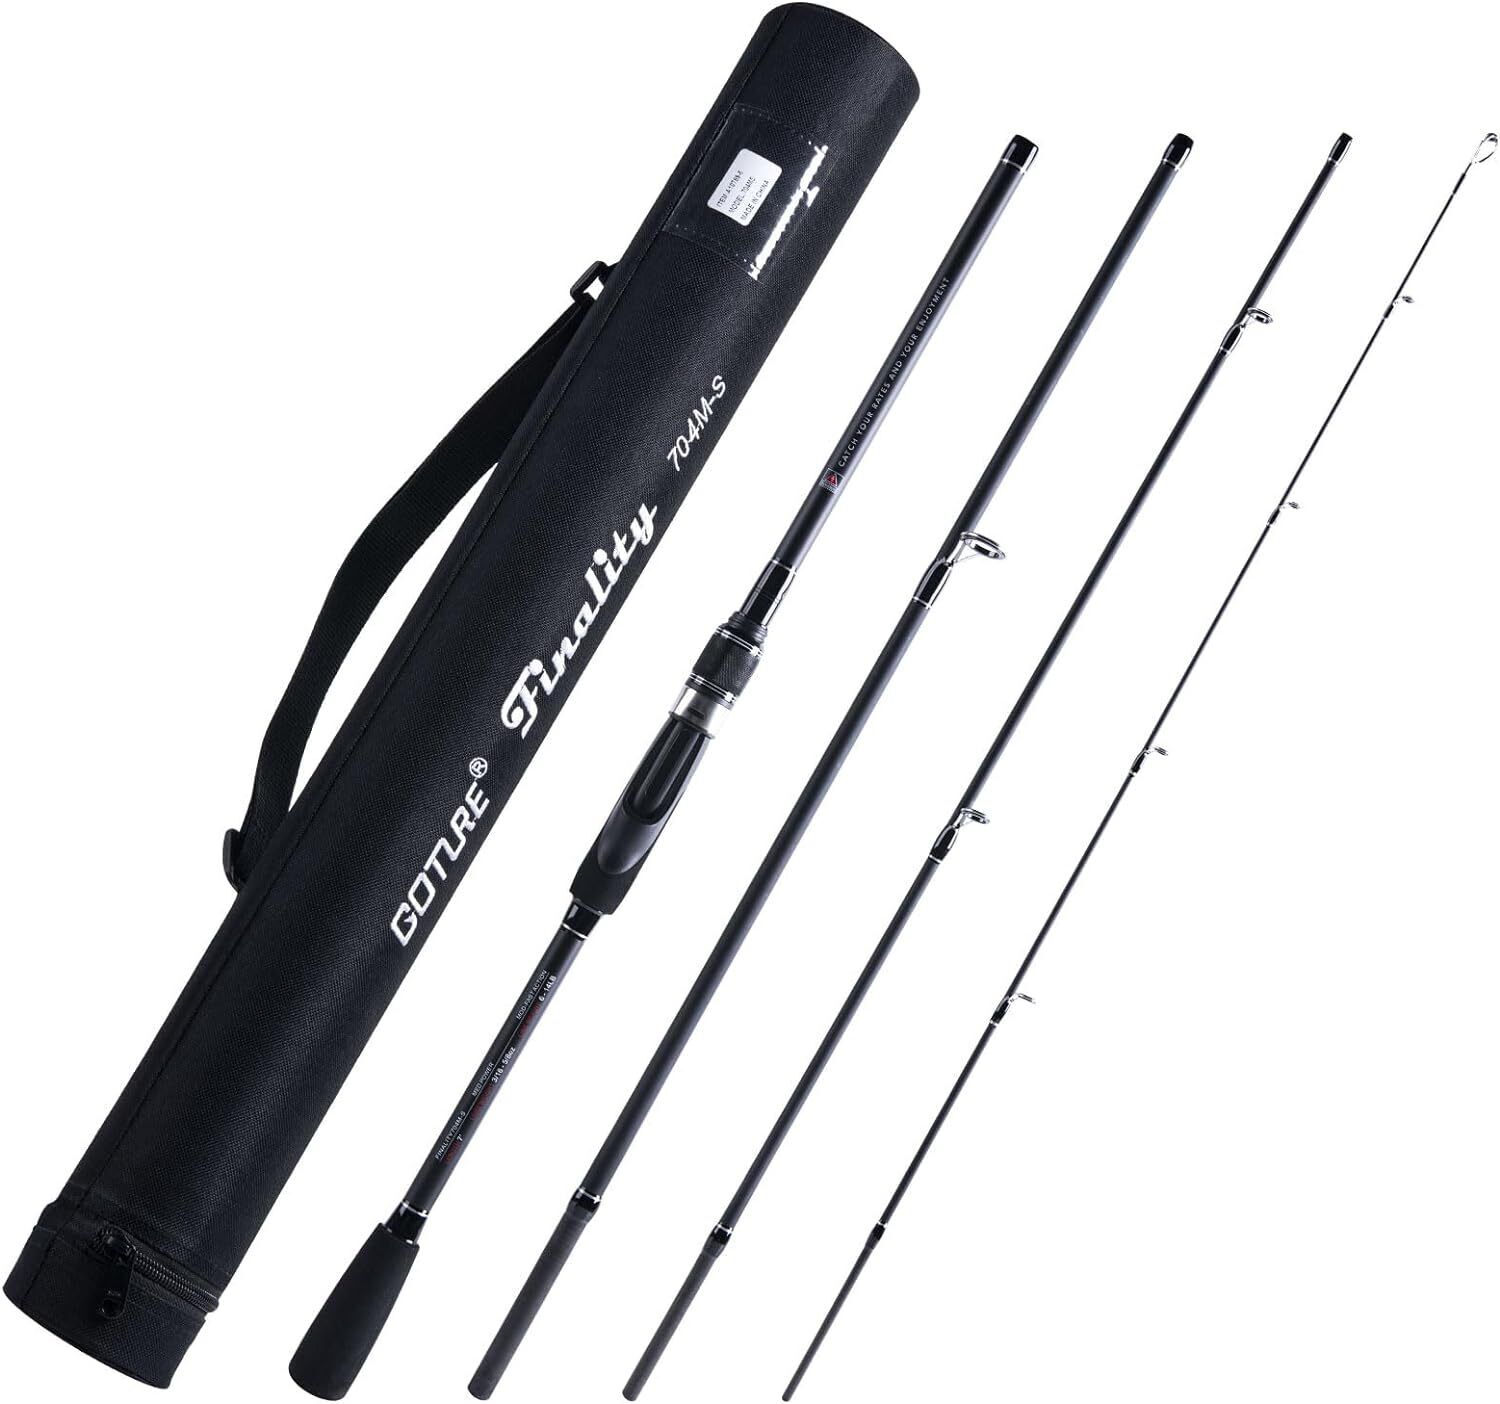 Travel Fishing Rods,4 Piece Fishing Pole with Case/Bag,Surf Casting/Spinning Rod